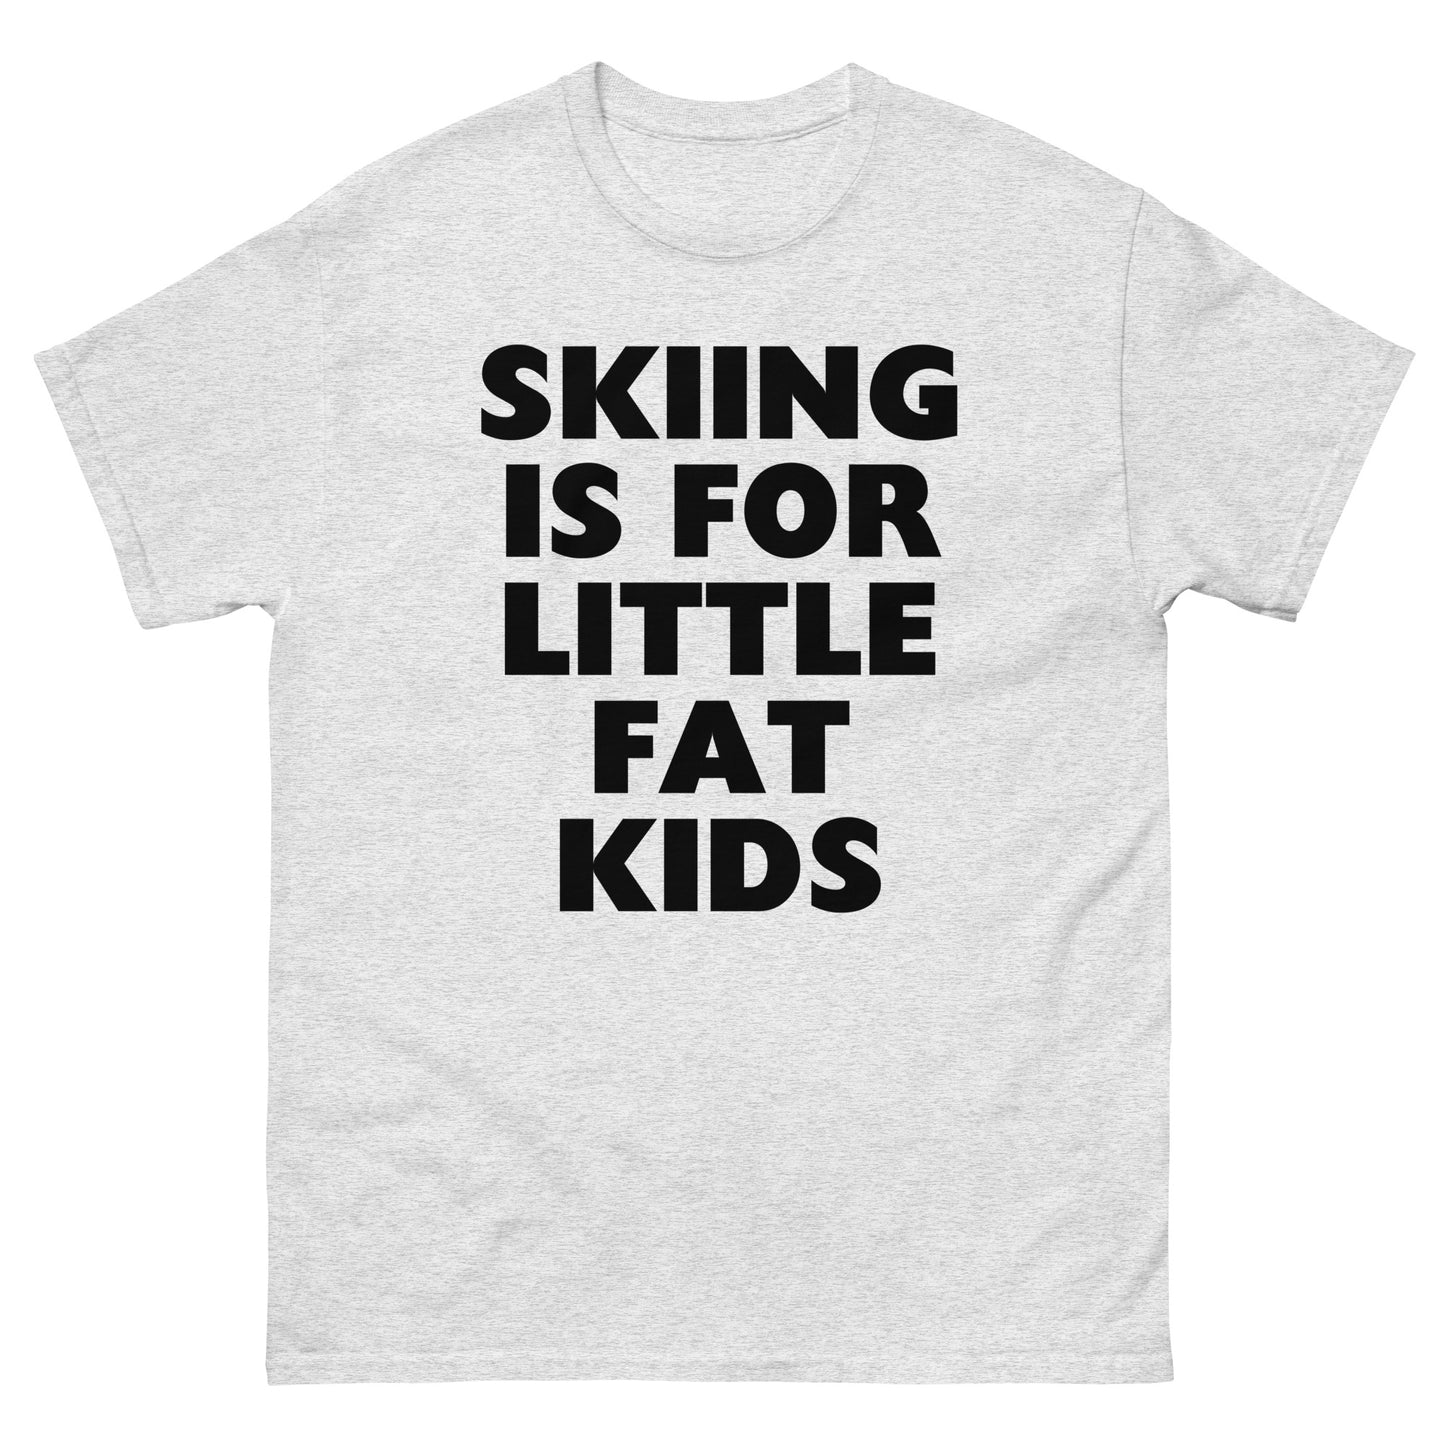 Skiing is for little fat kids printed on t-shirt by Whistler shirts